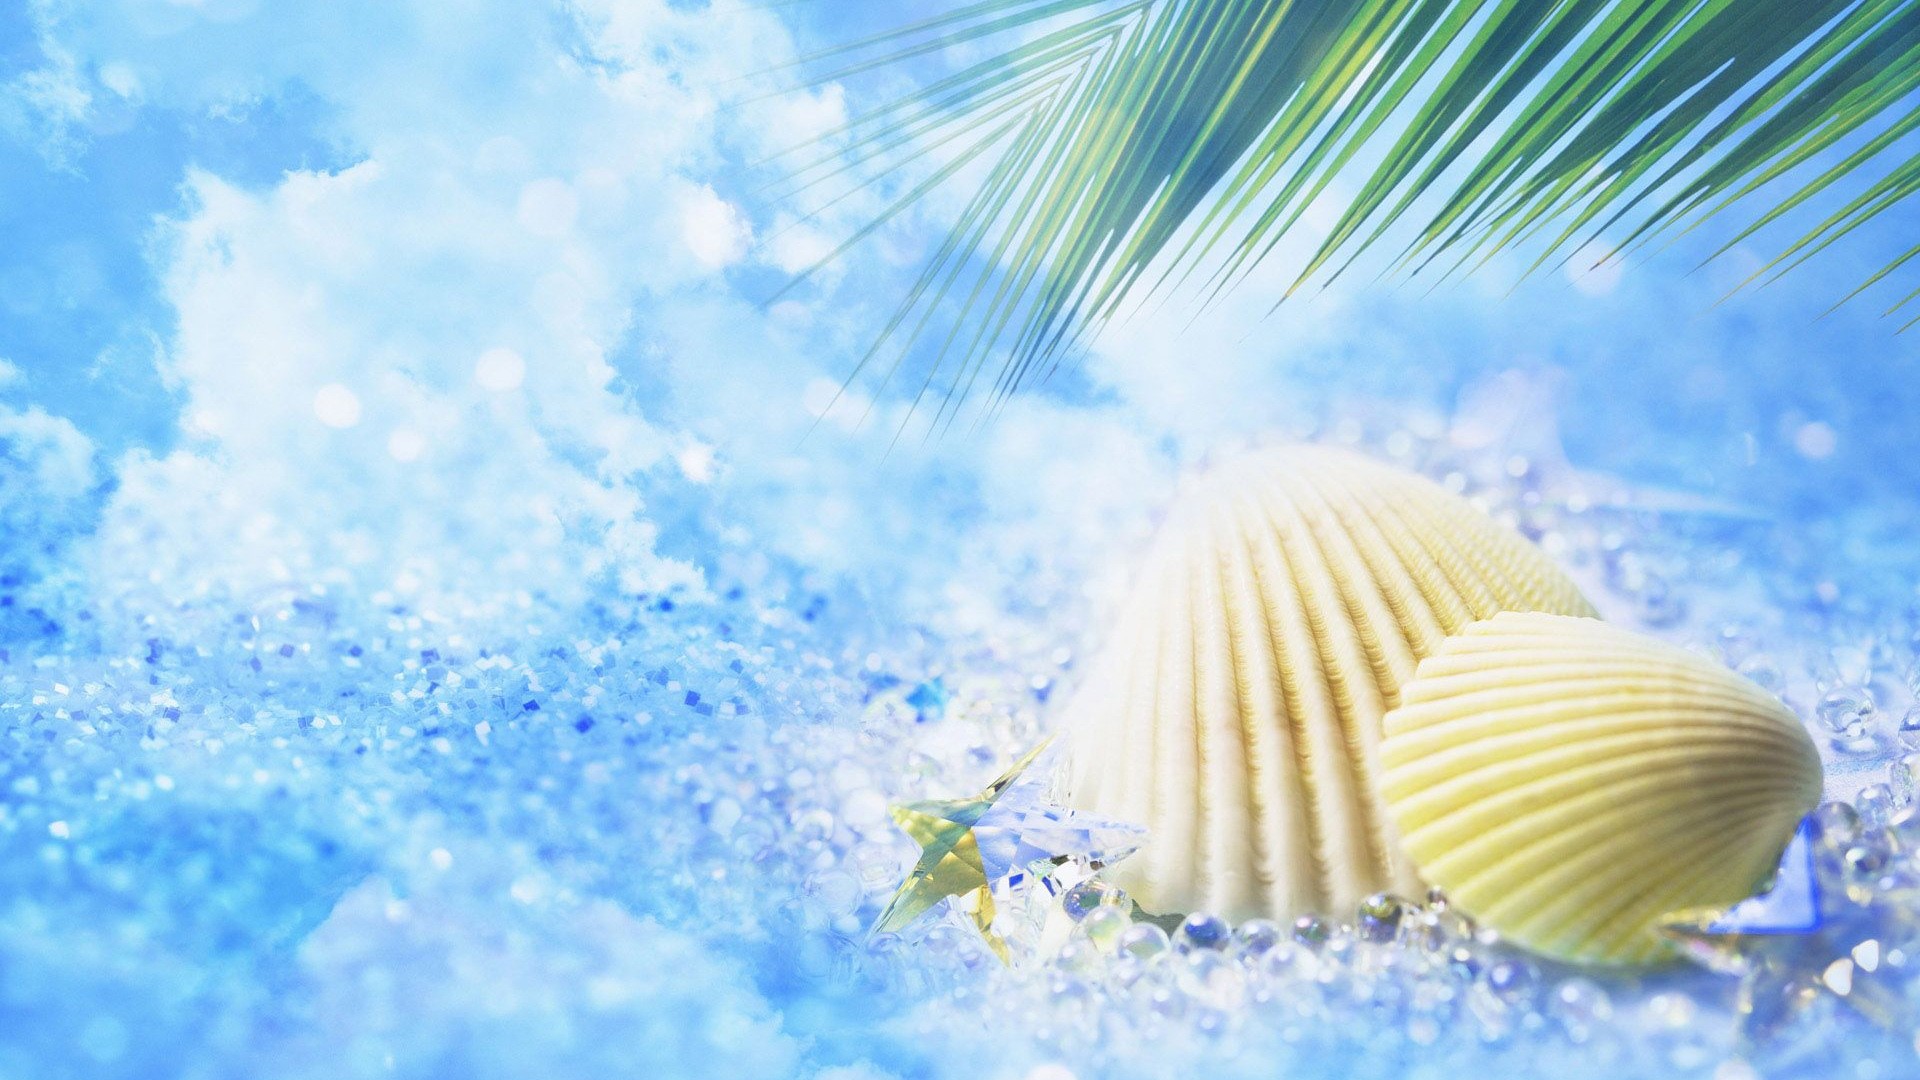 1920x1080 Images download summer wallpapers HD.